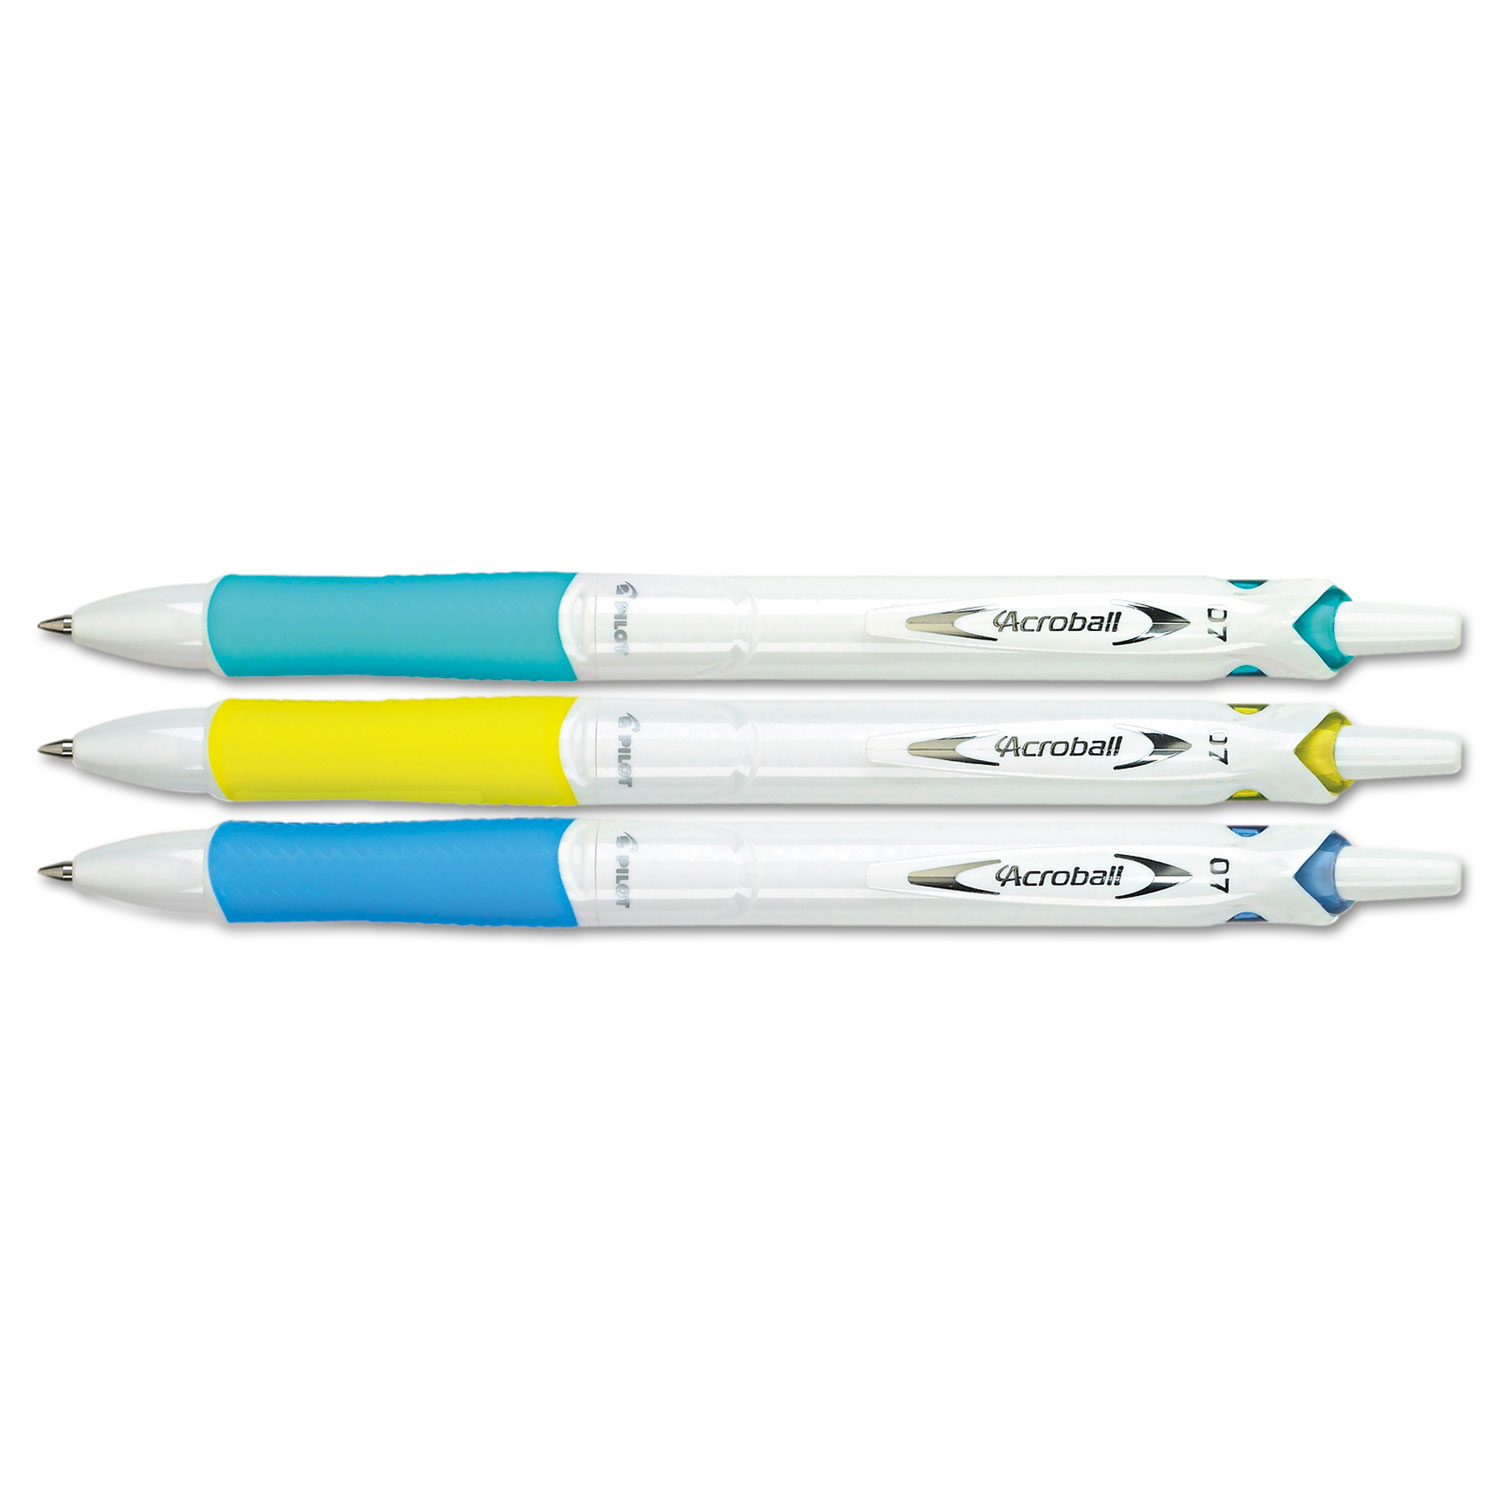 Acroball PureWhite Pen, .7mm, Black Ink, Blue/Lime/Turquoise Barrels, 3/Pack